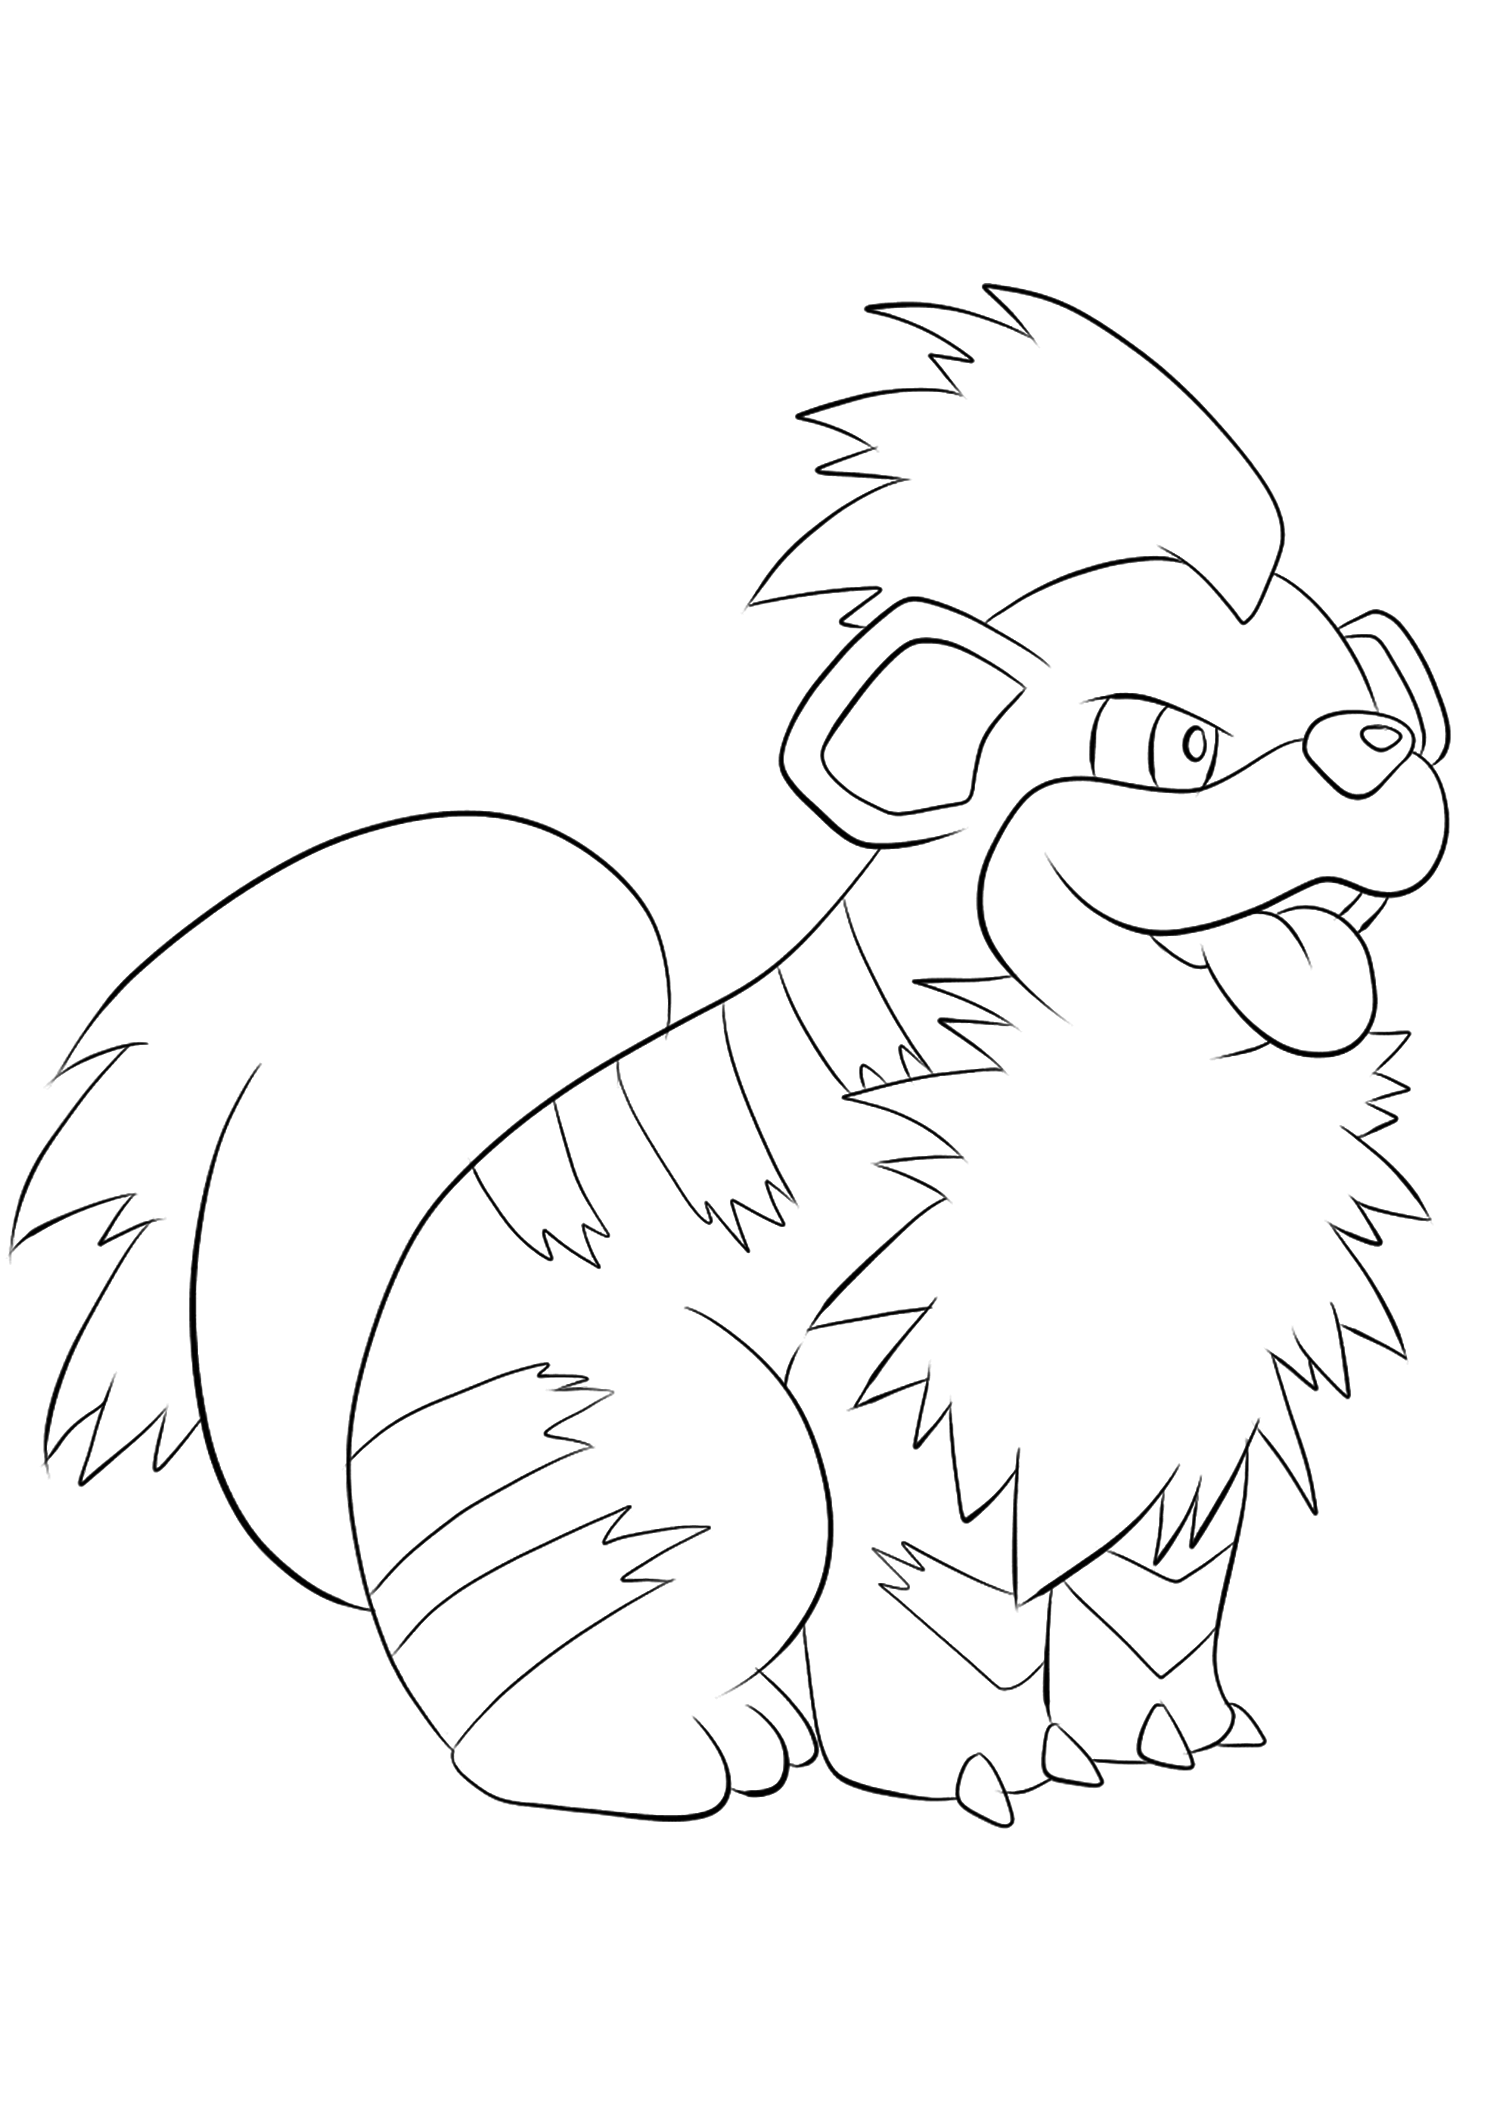 Growlithe No.58 Pokemon Generation I All Pokemon coloring pages